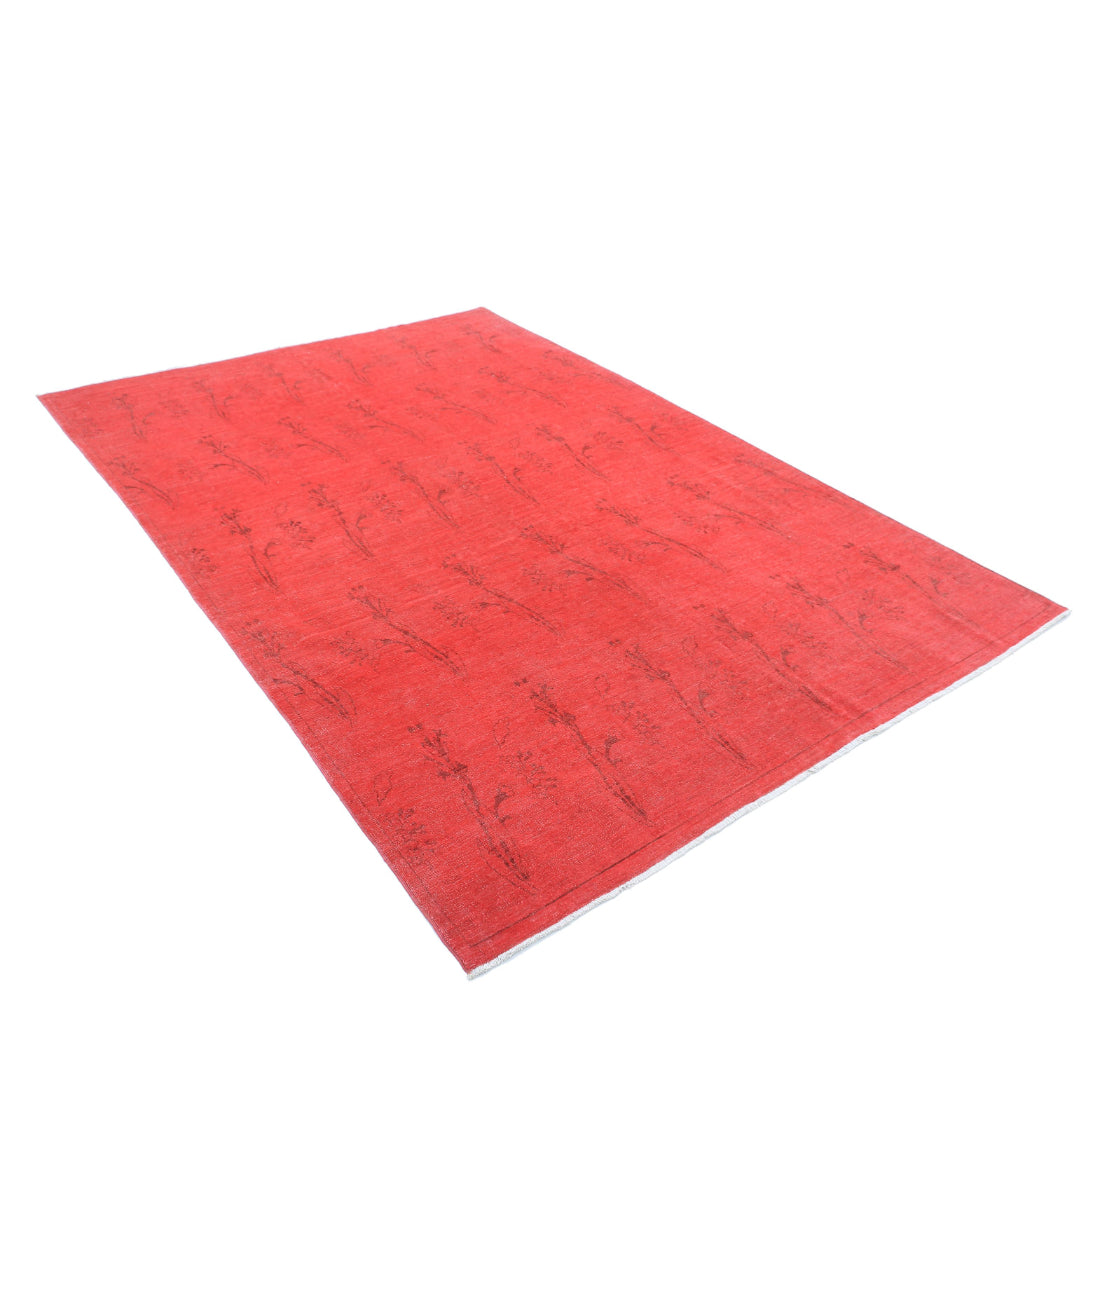 Hand Knotted Overdye Wool Rug - 5'11'' x 8'8'' 5'11'' x 8'8'' (178 X 260) / Red / Red